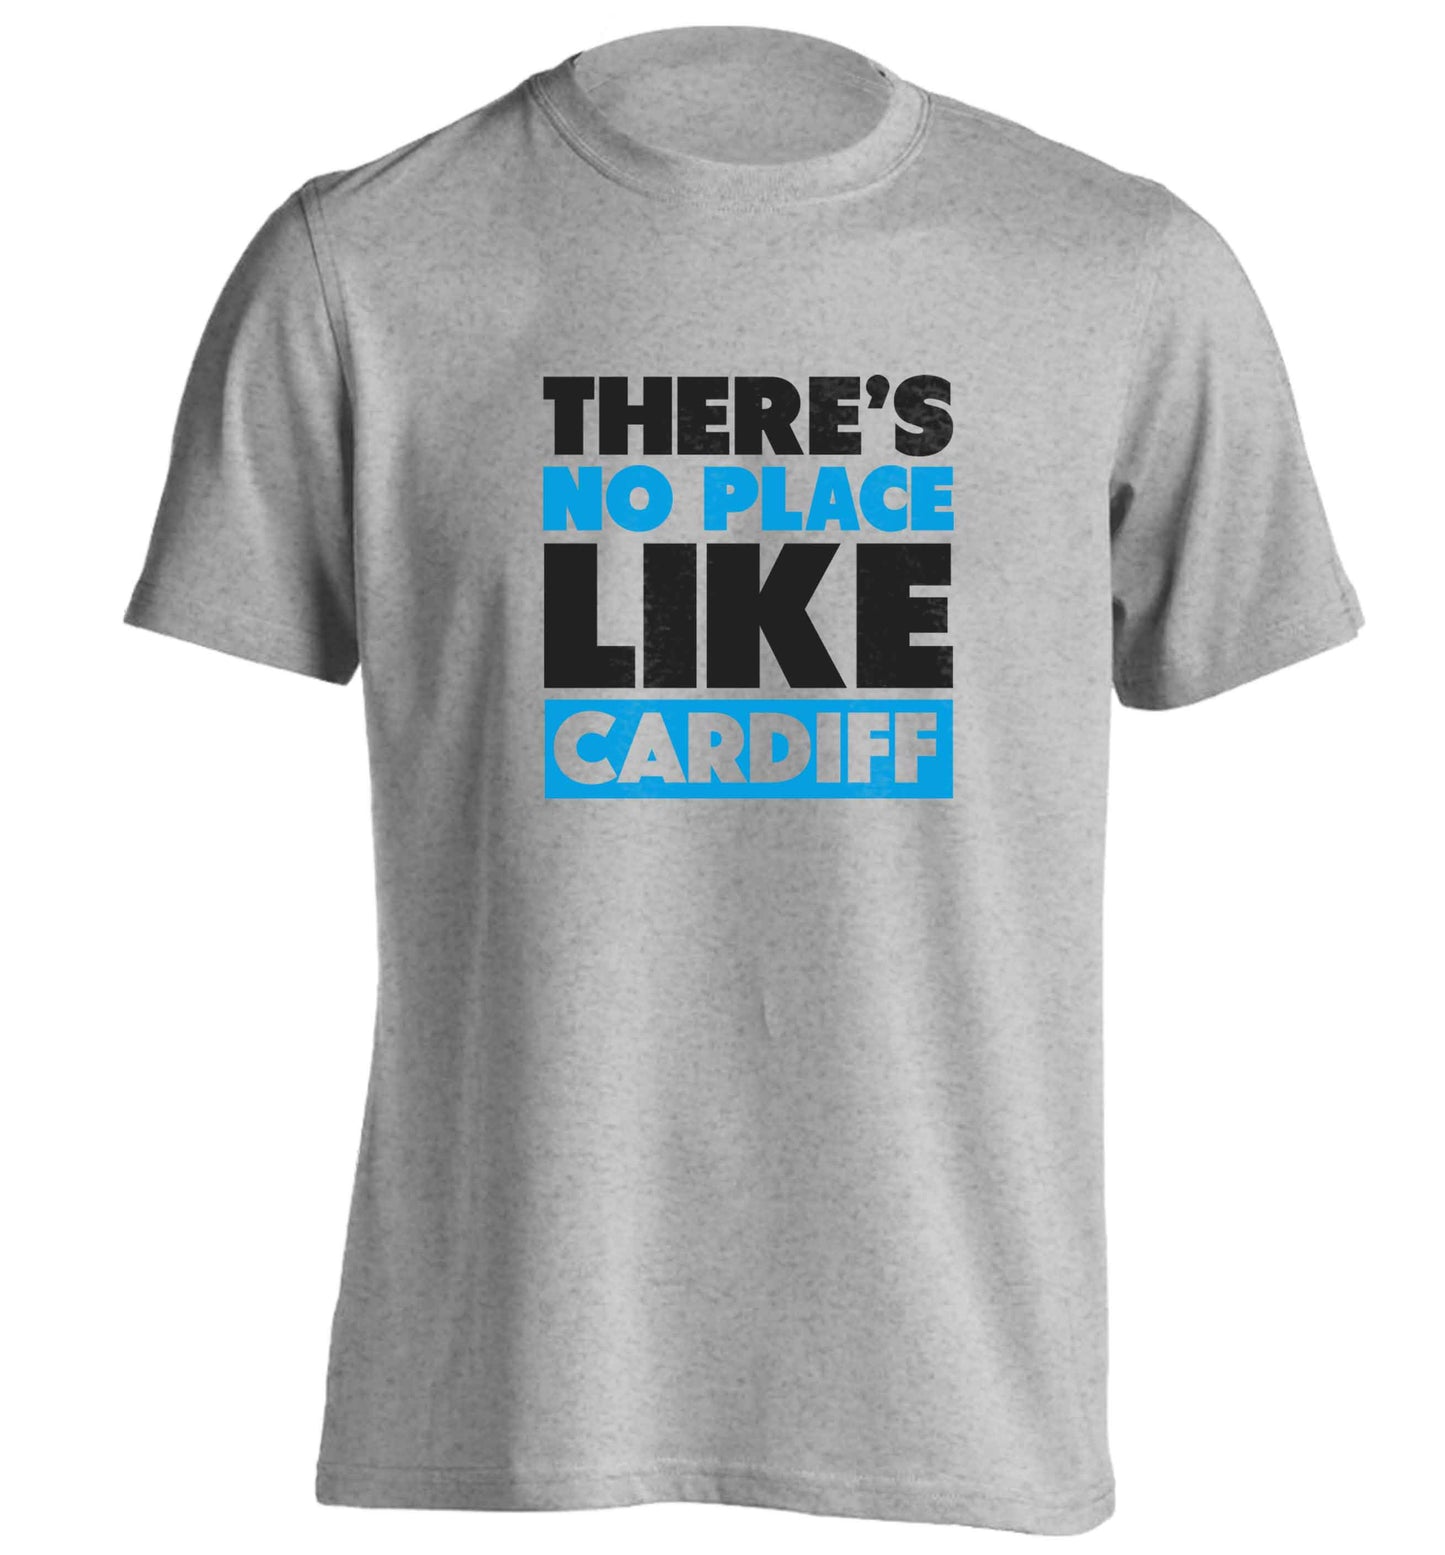 There's no place like Cardiff adults unisex grey Tshirt 2XL